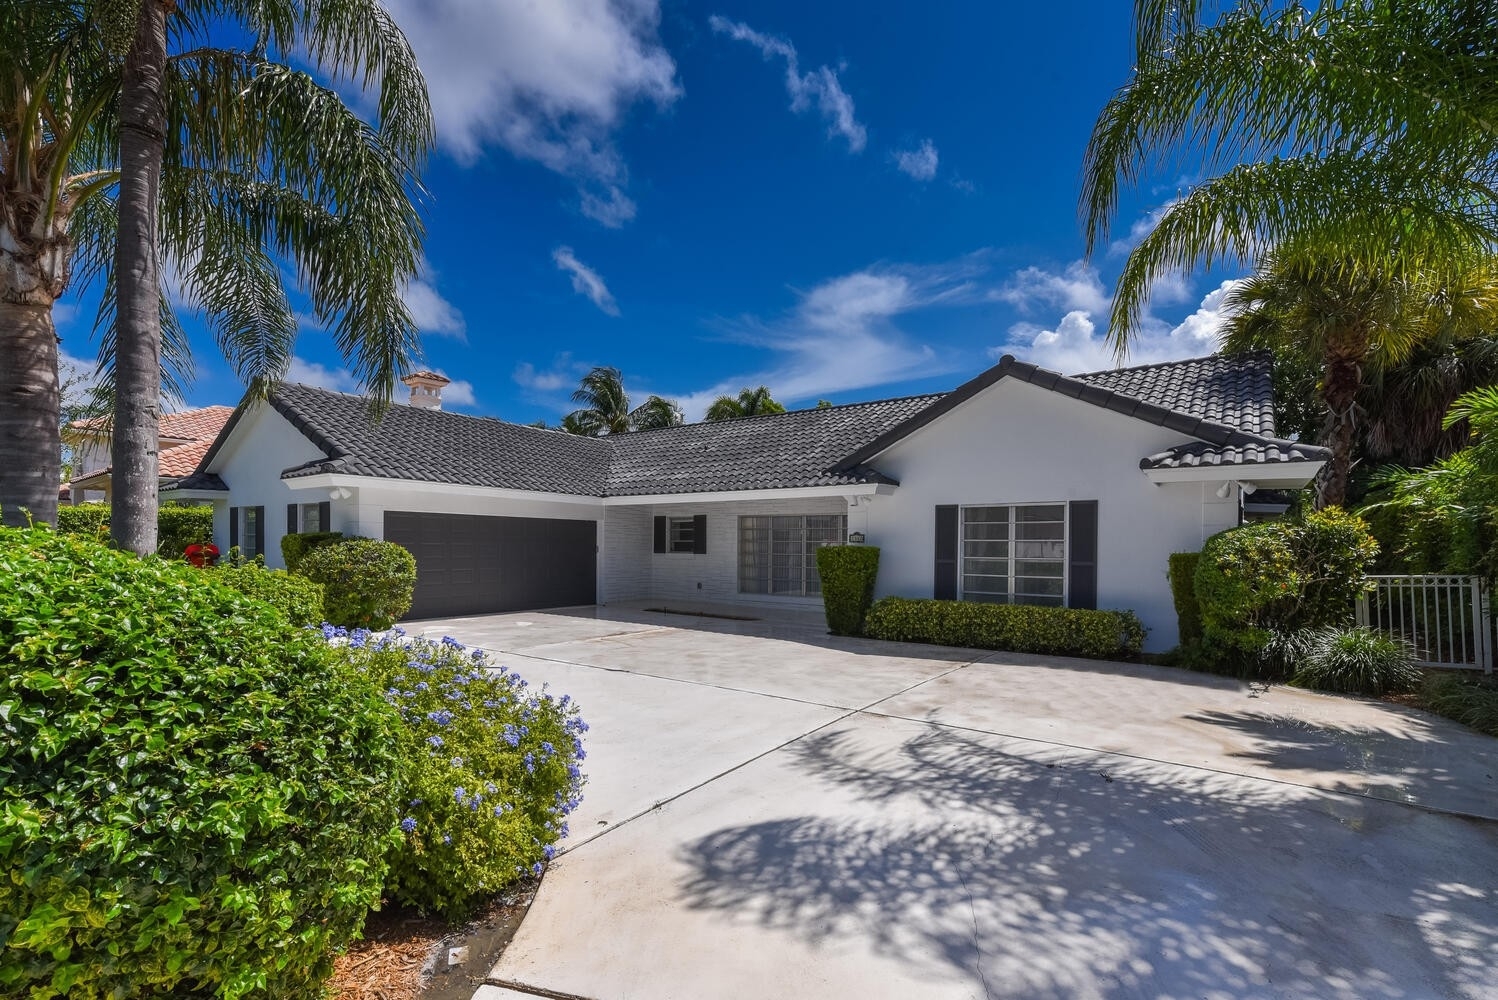 Single Family Home at Royal Palm Yacht and Country Club, Boca Raton, FL 33432